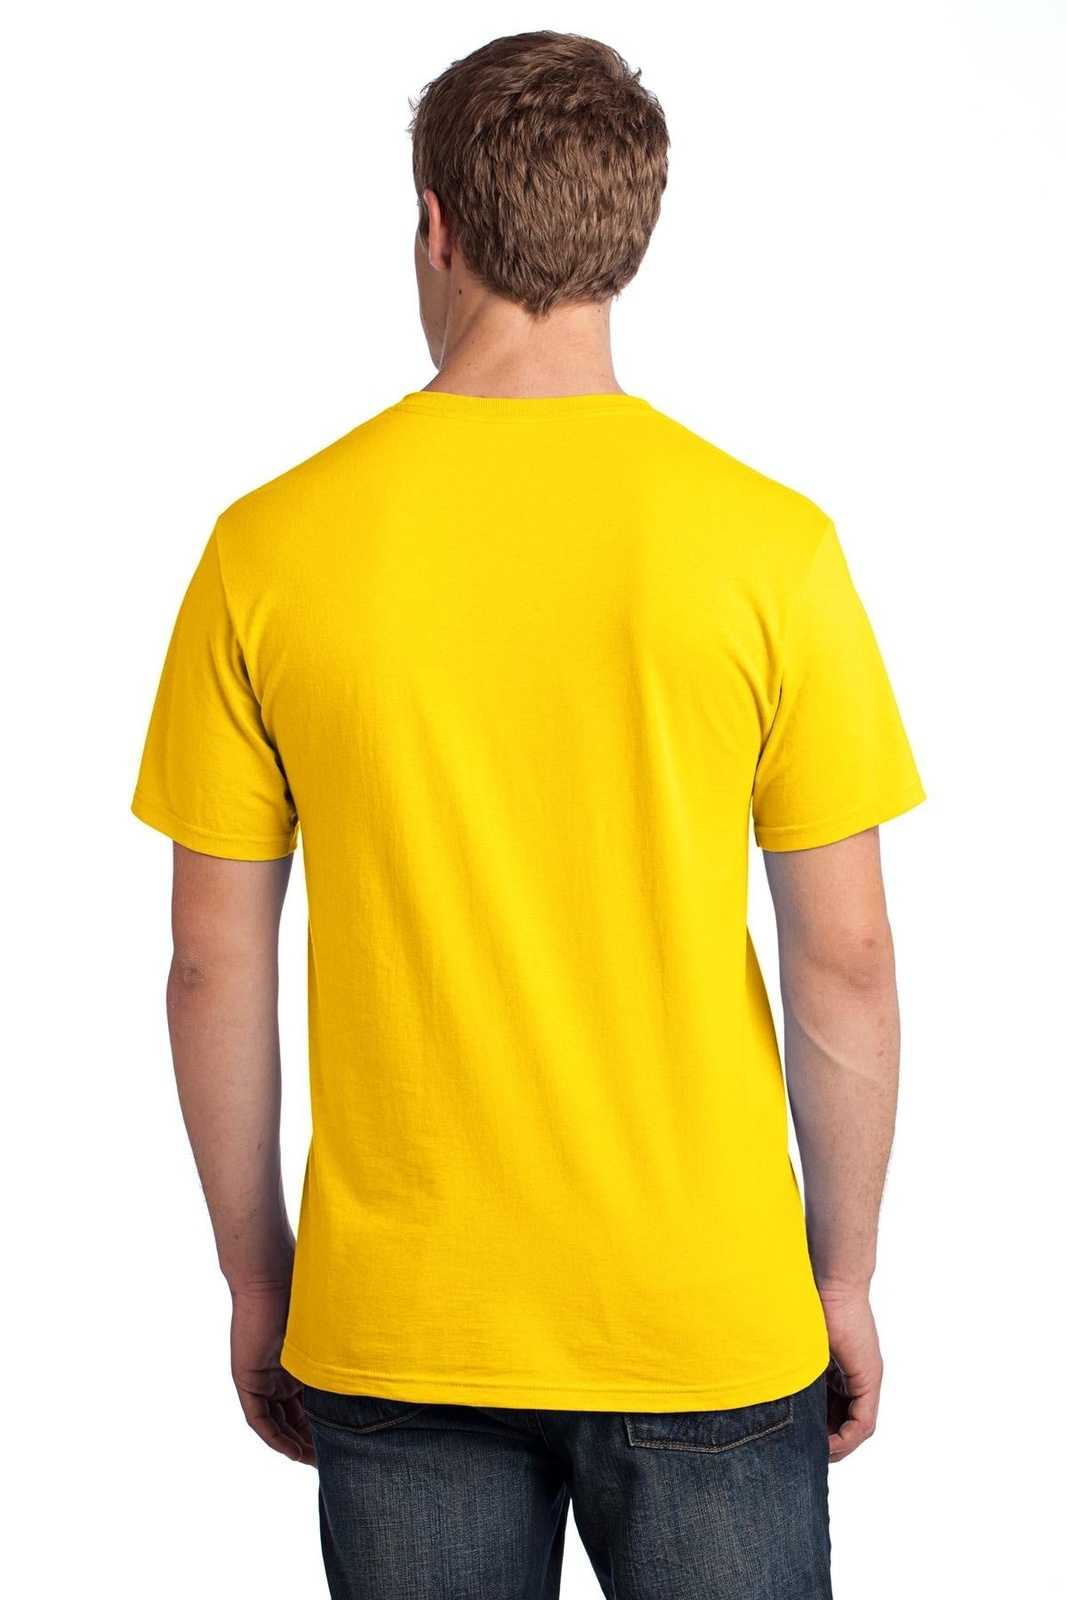 Fruit of the Loom HD Cotton 100% Cotton T-Shirt - Yellow